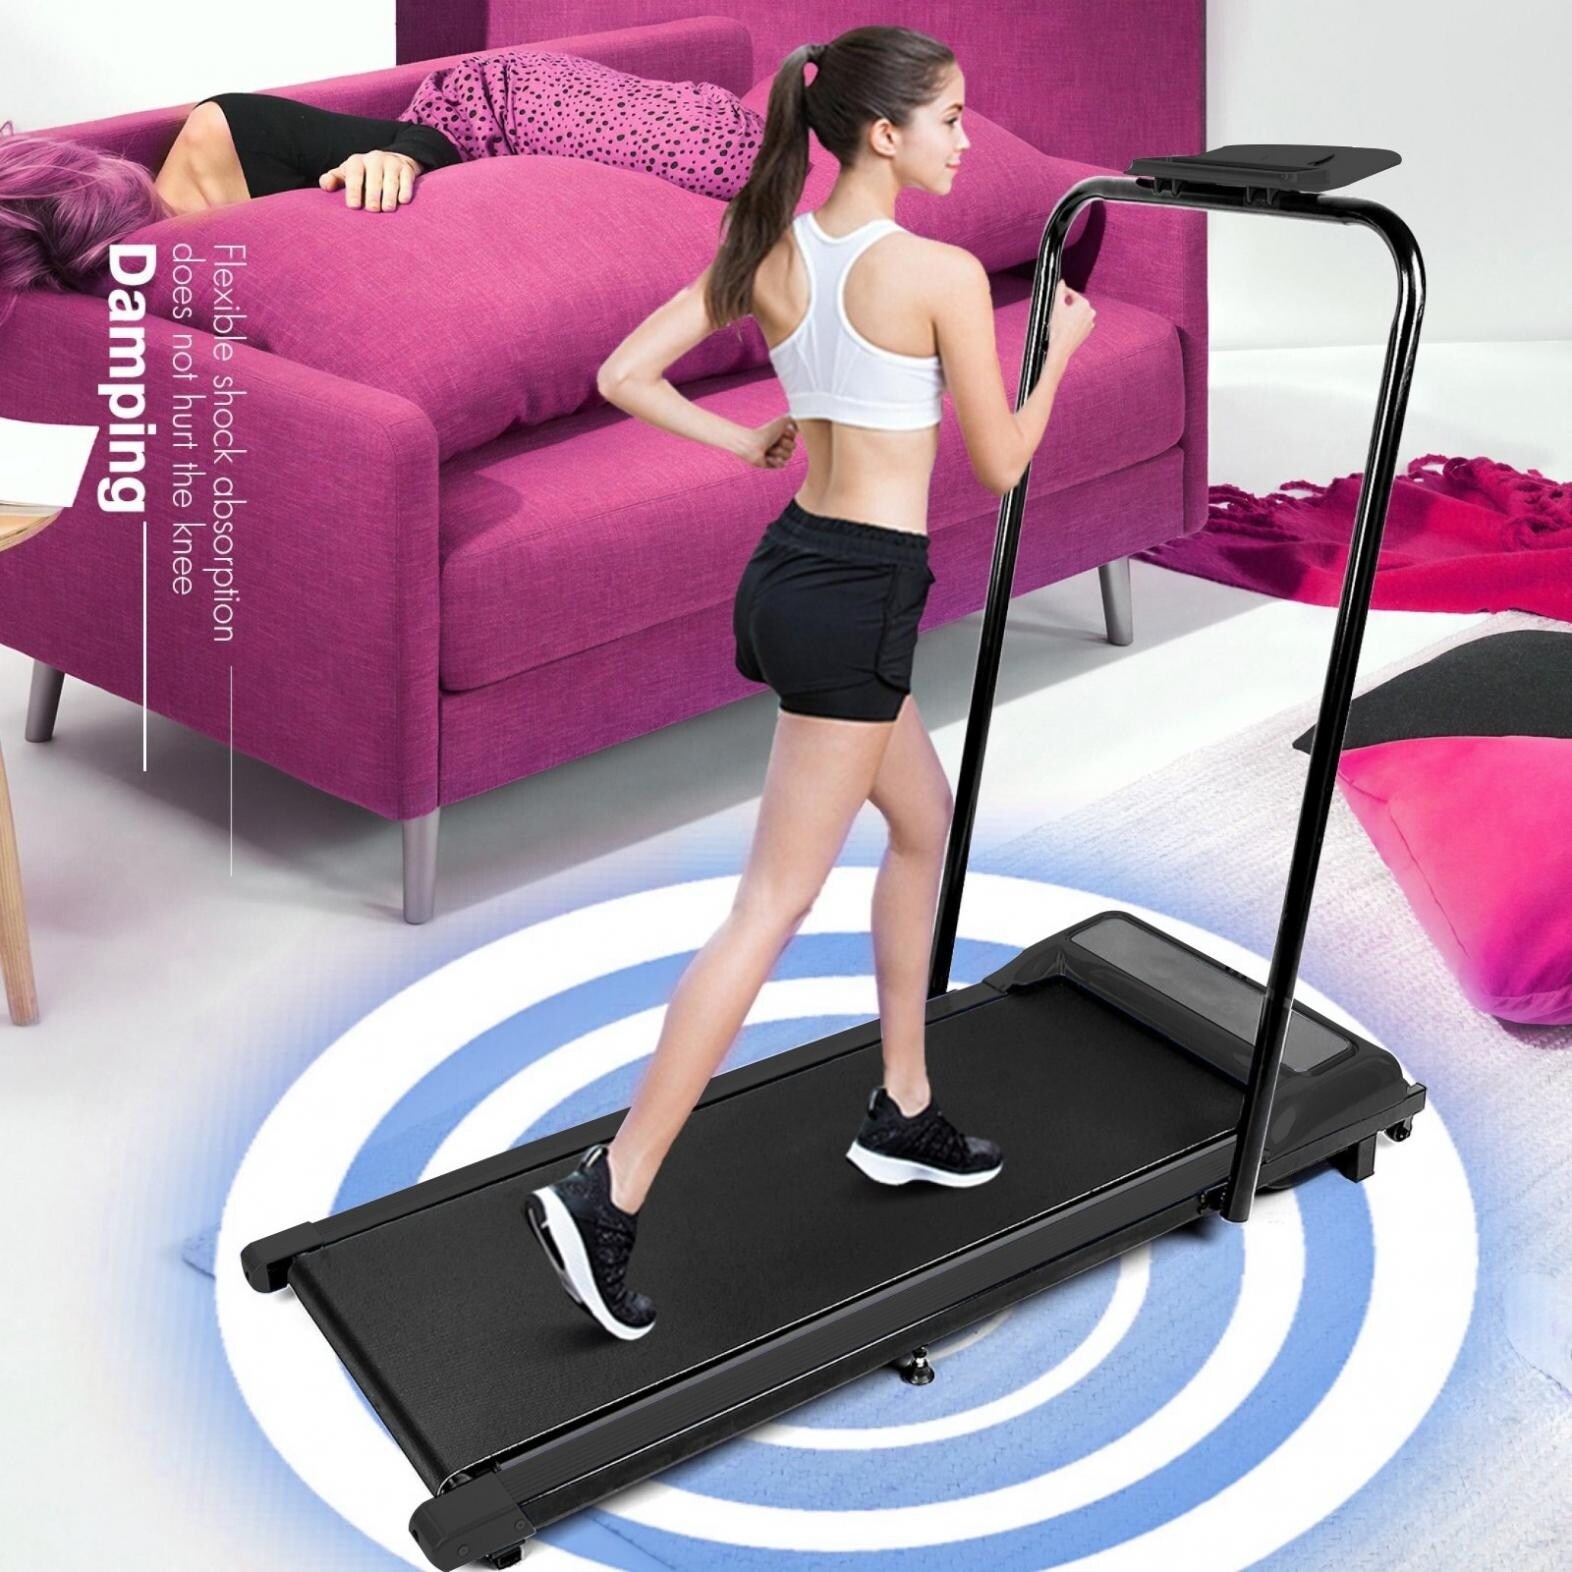 Perspire Portable Foldable freadmill,Household Mini Silent Fitness Treadmills Professional Treadmill for Home and Office Walking/Twisting Waist/Sit-Ups/Pulling Rope 